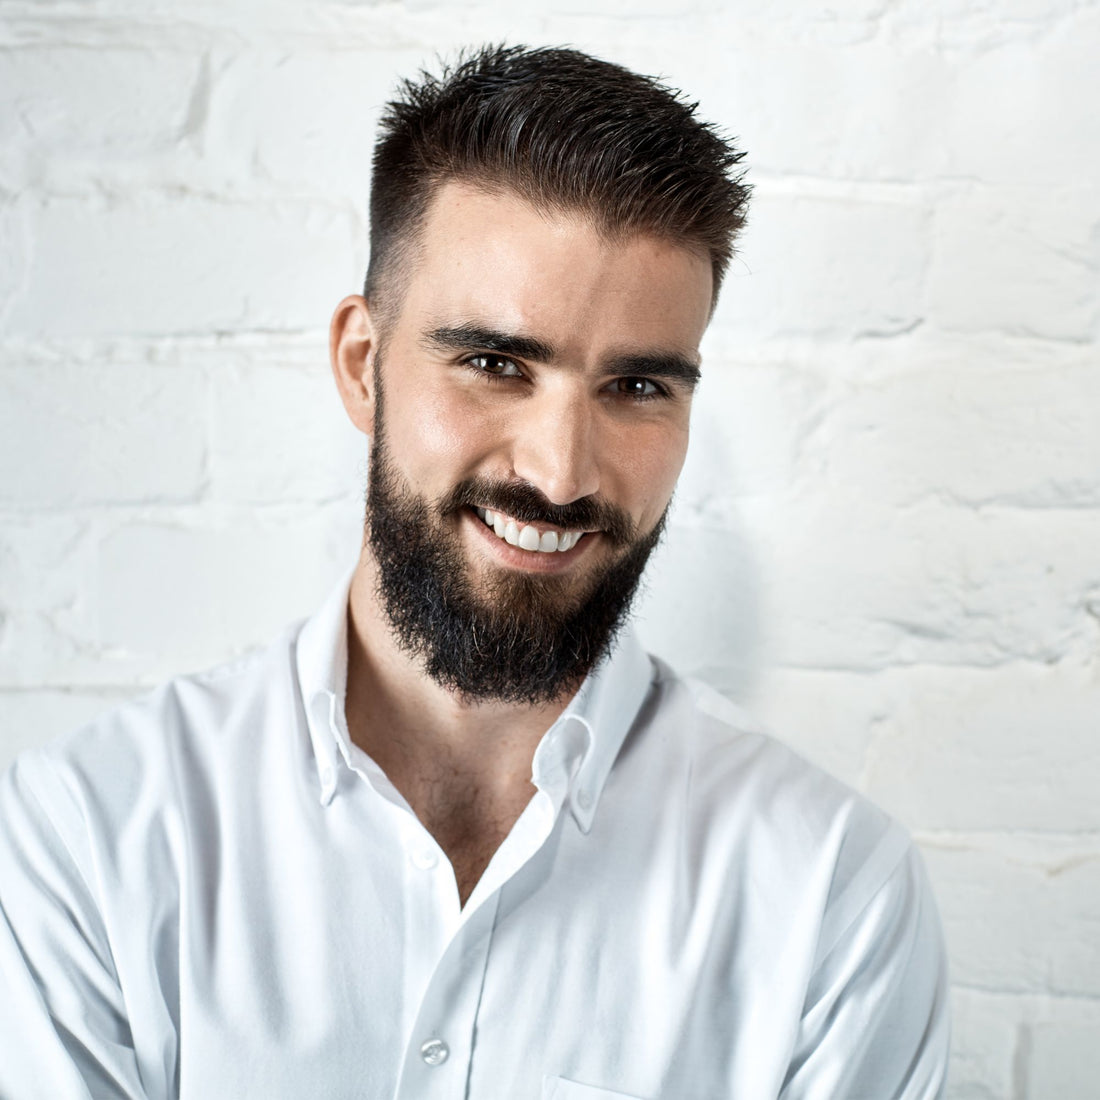 Smiling man with a full beard